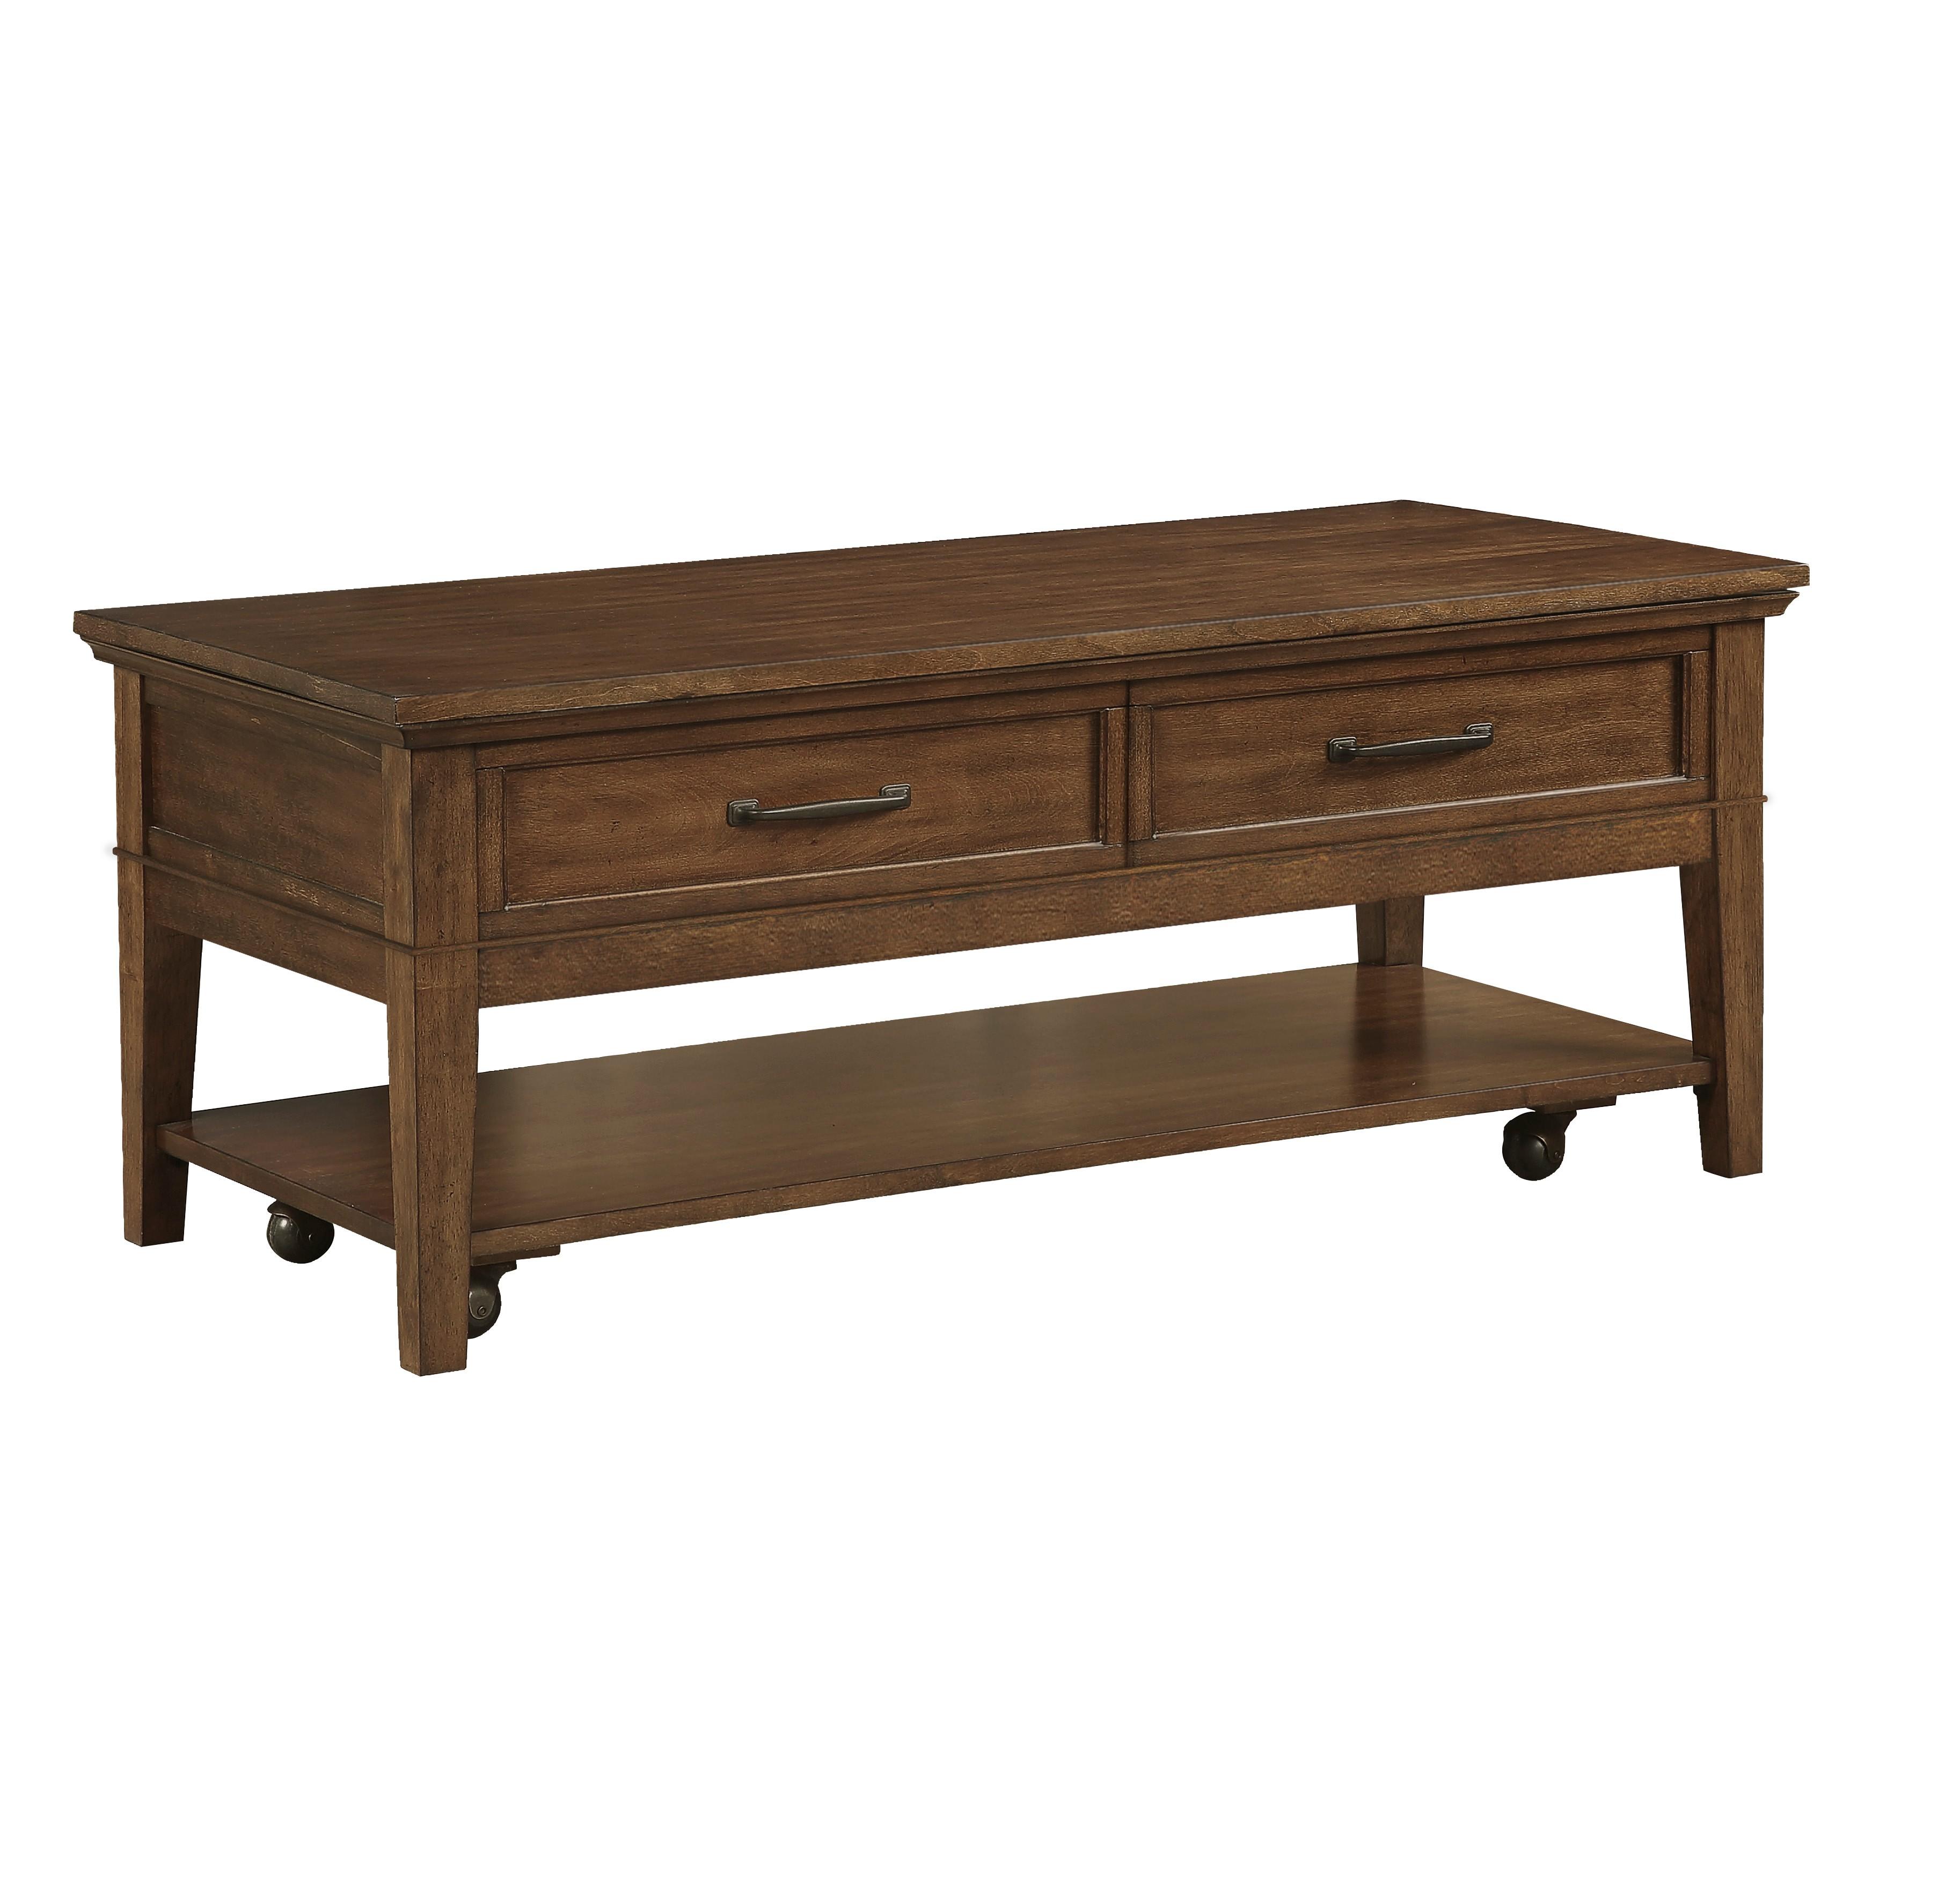 

    
Transitional Walnut Finish Wood Cocktail Table Homelegance 3620-30 Whitley
